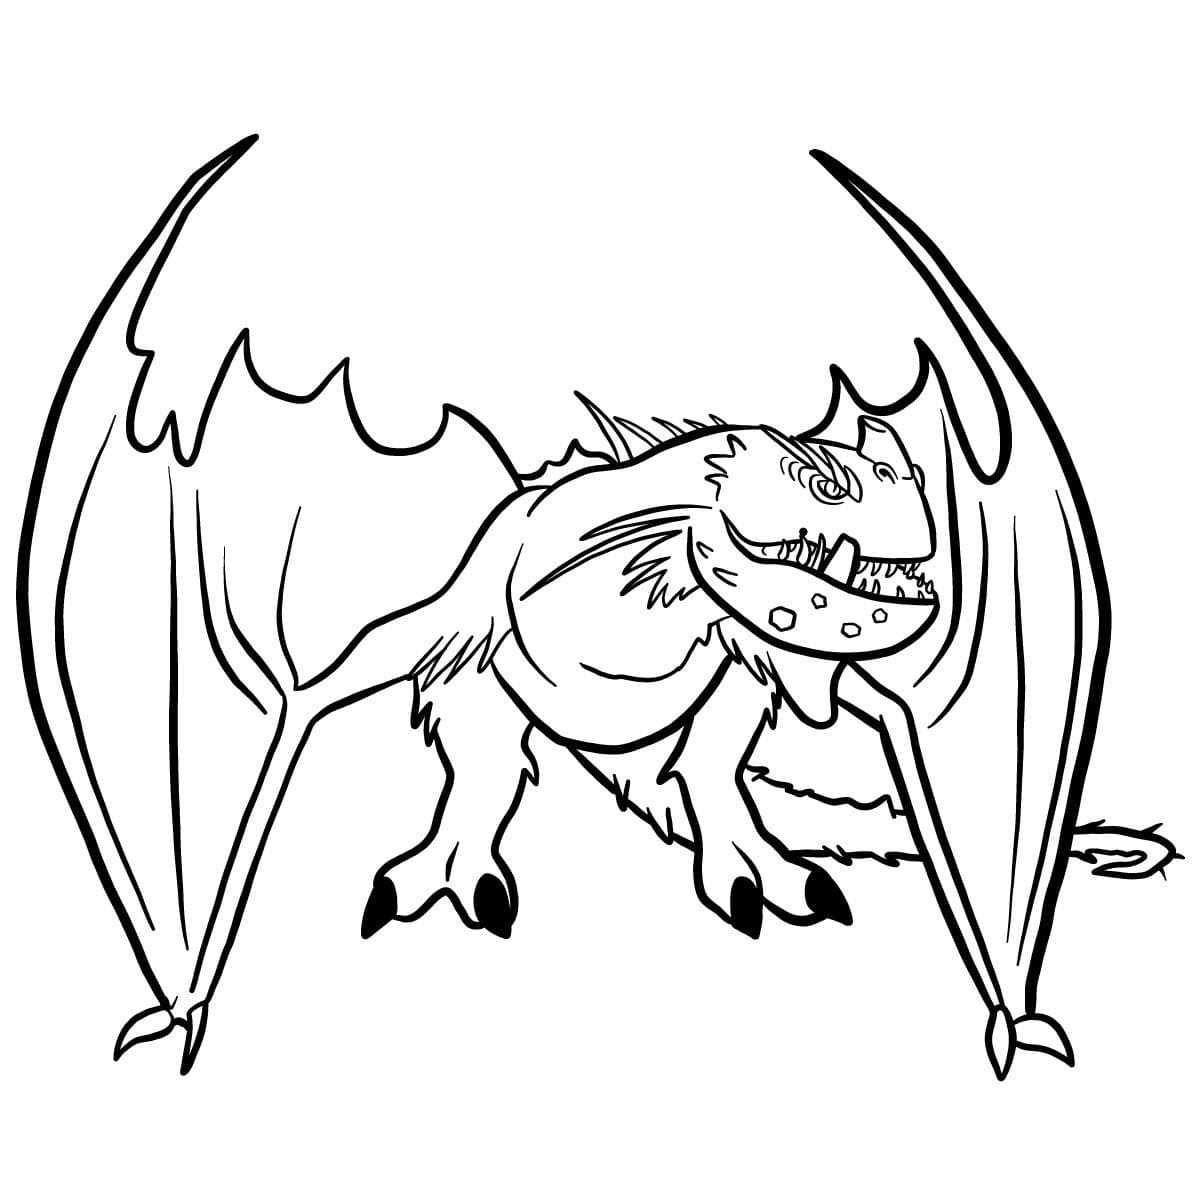 Download Coloring Pages How to Train Your Dragon 3. Best Collection